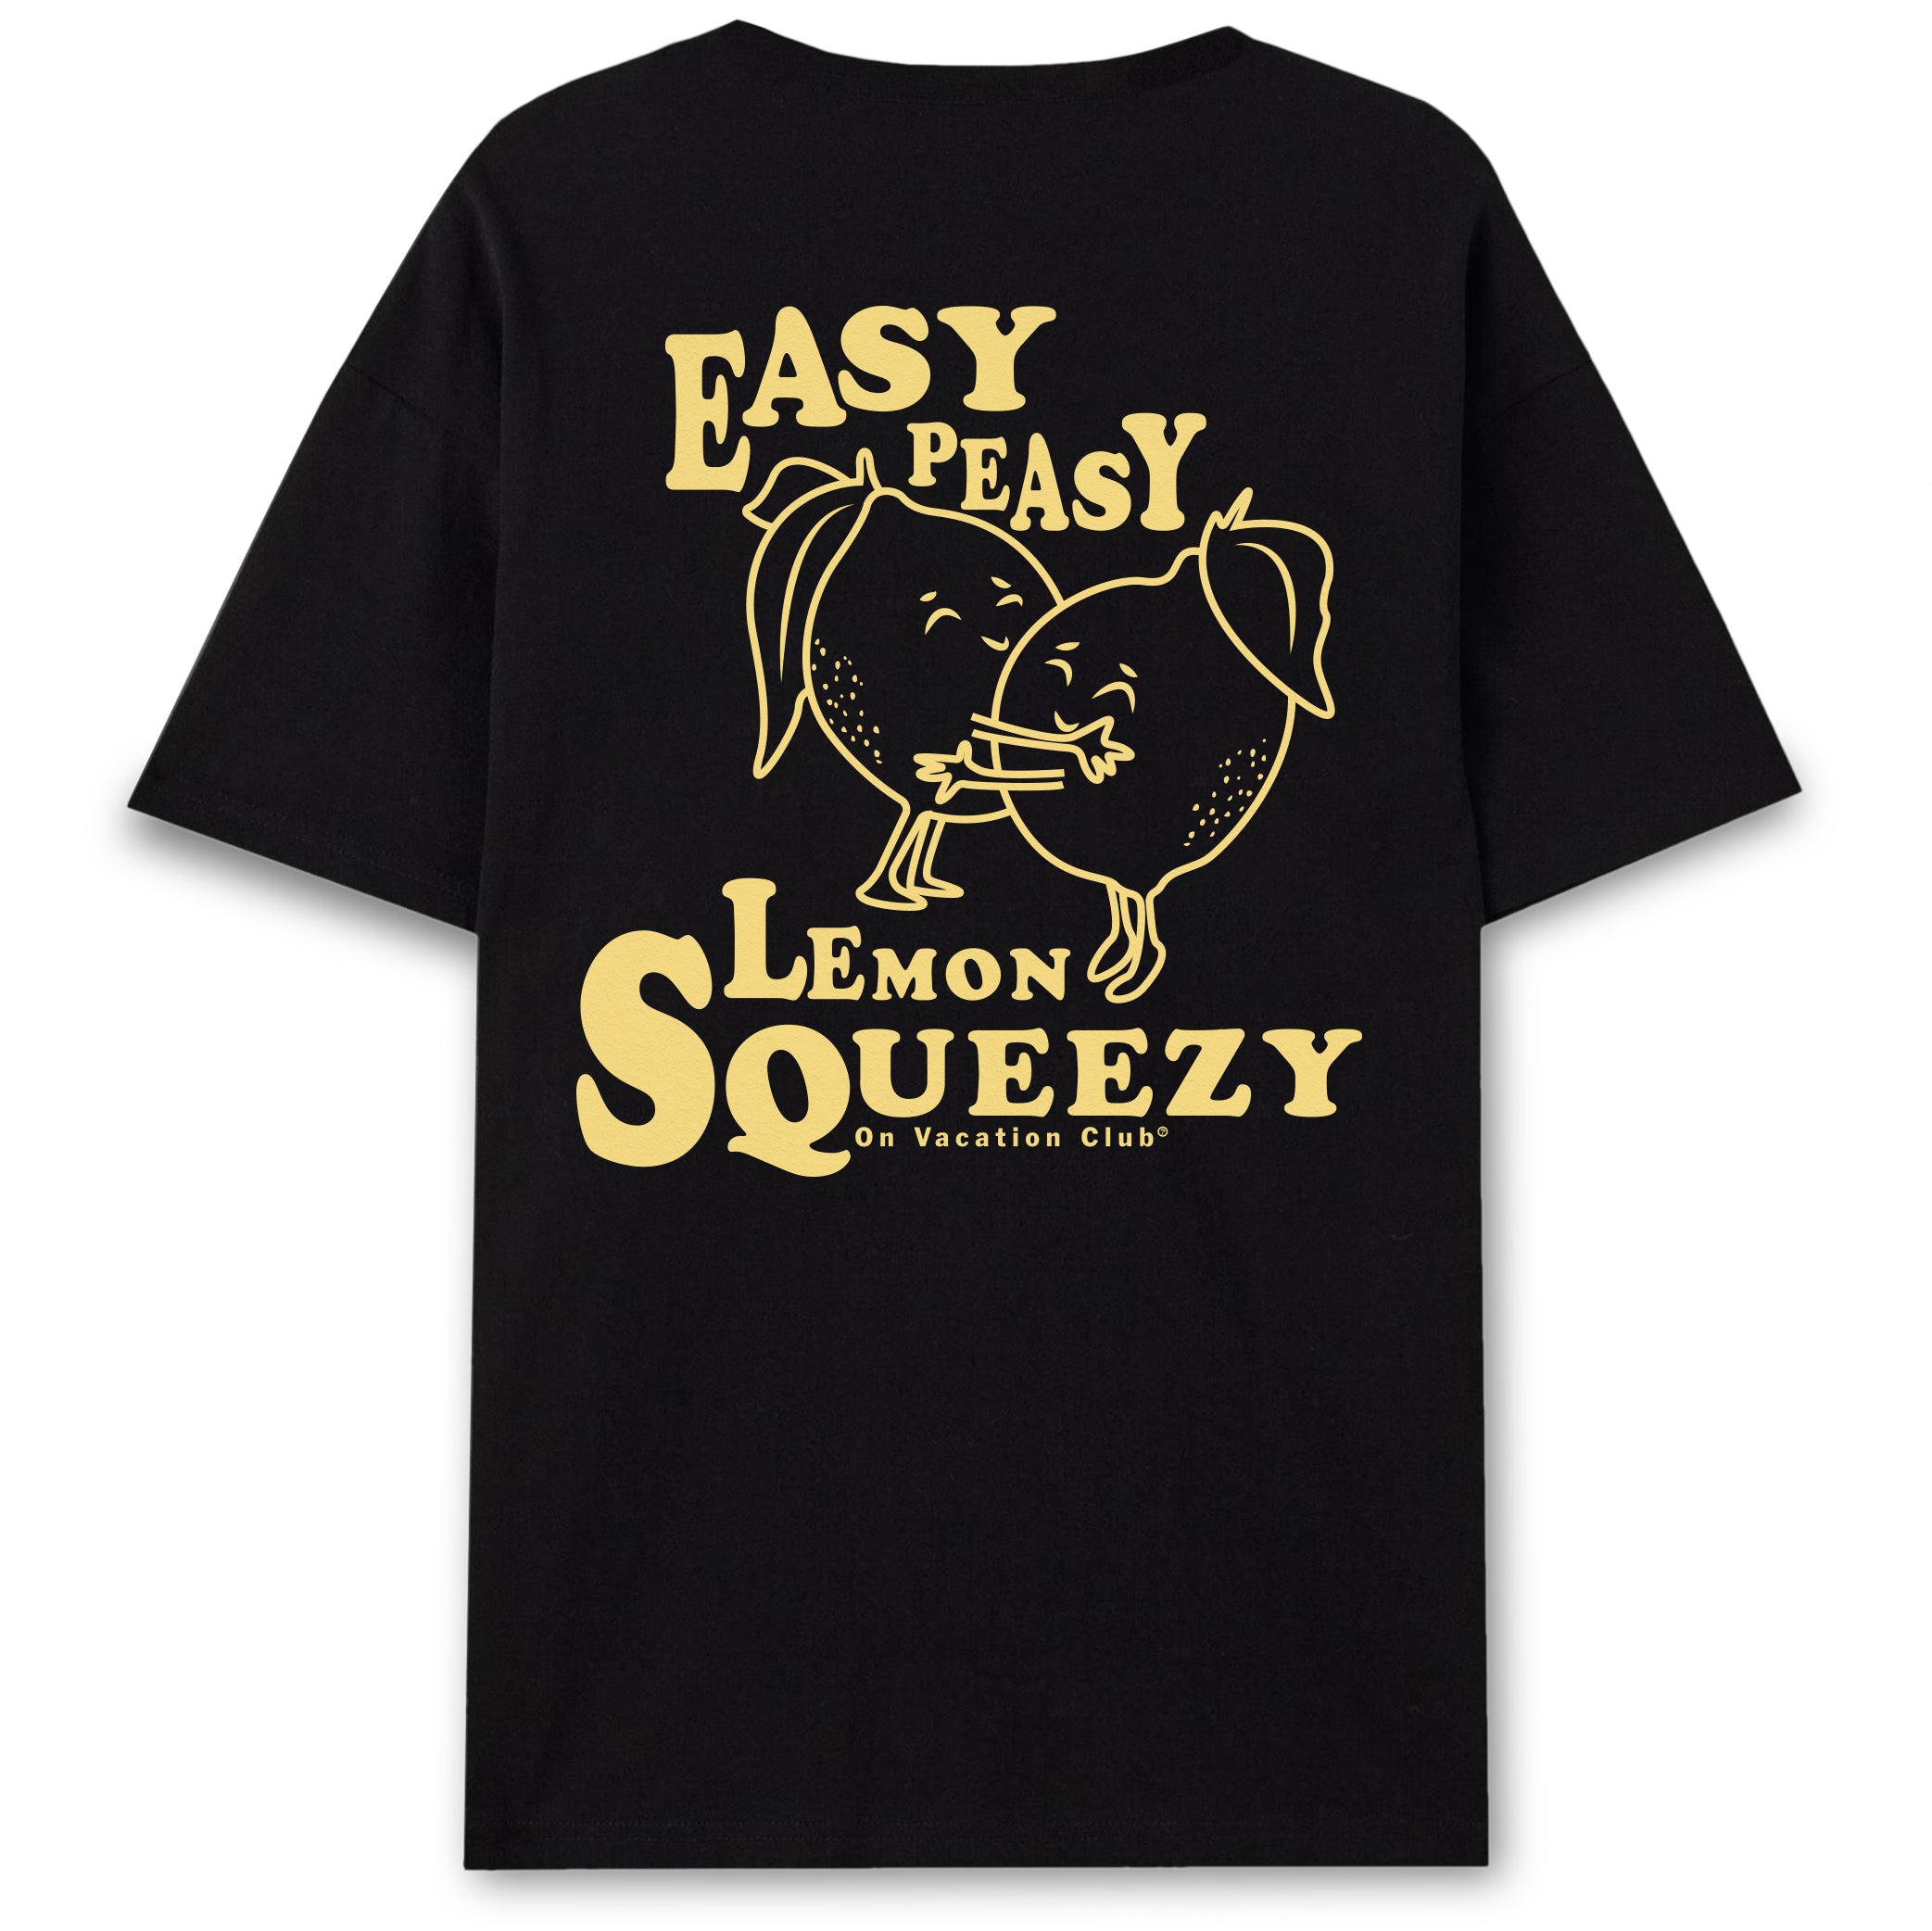 On Vacation "Lemon Squeezy" T-Shirt